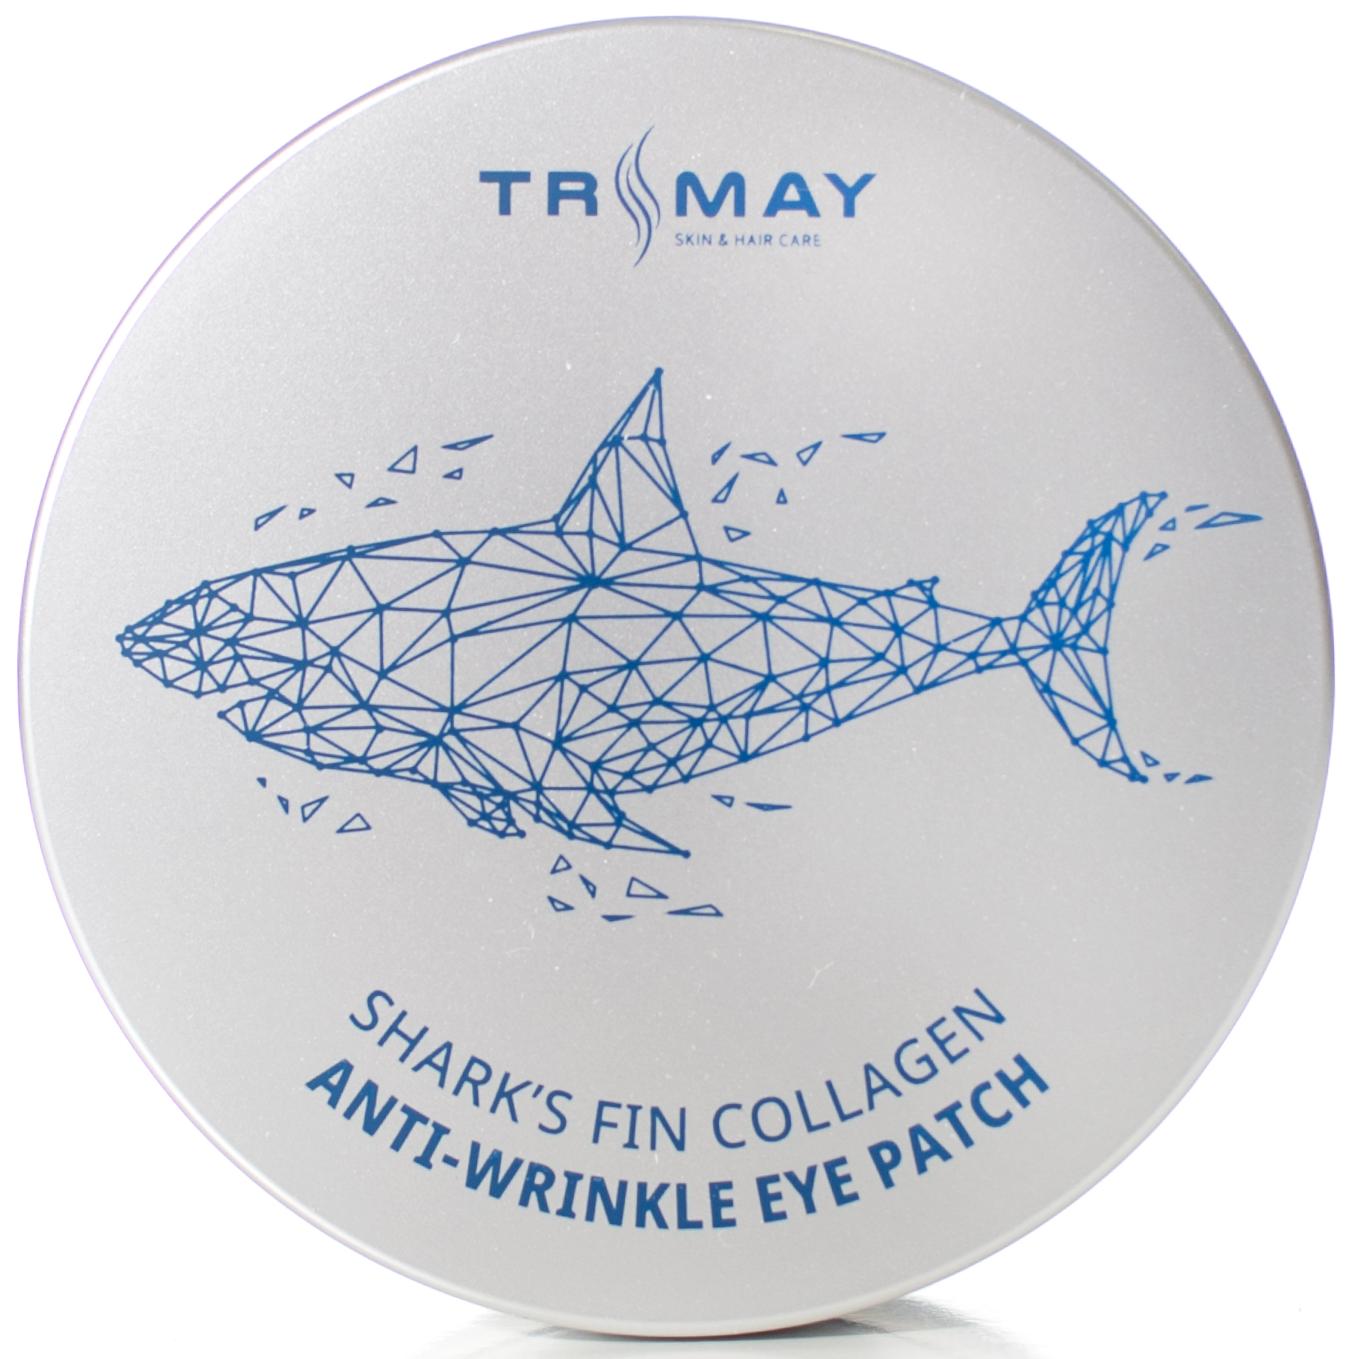 Патчи гидрогелевые Shark’s Fin Collagen Anti-wrinkle Eye Patch, 90шт Trimay